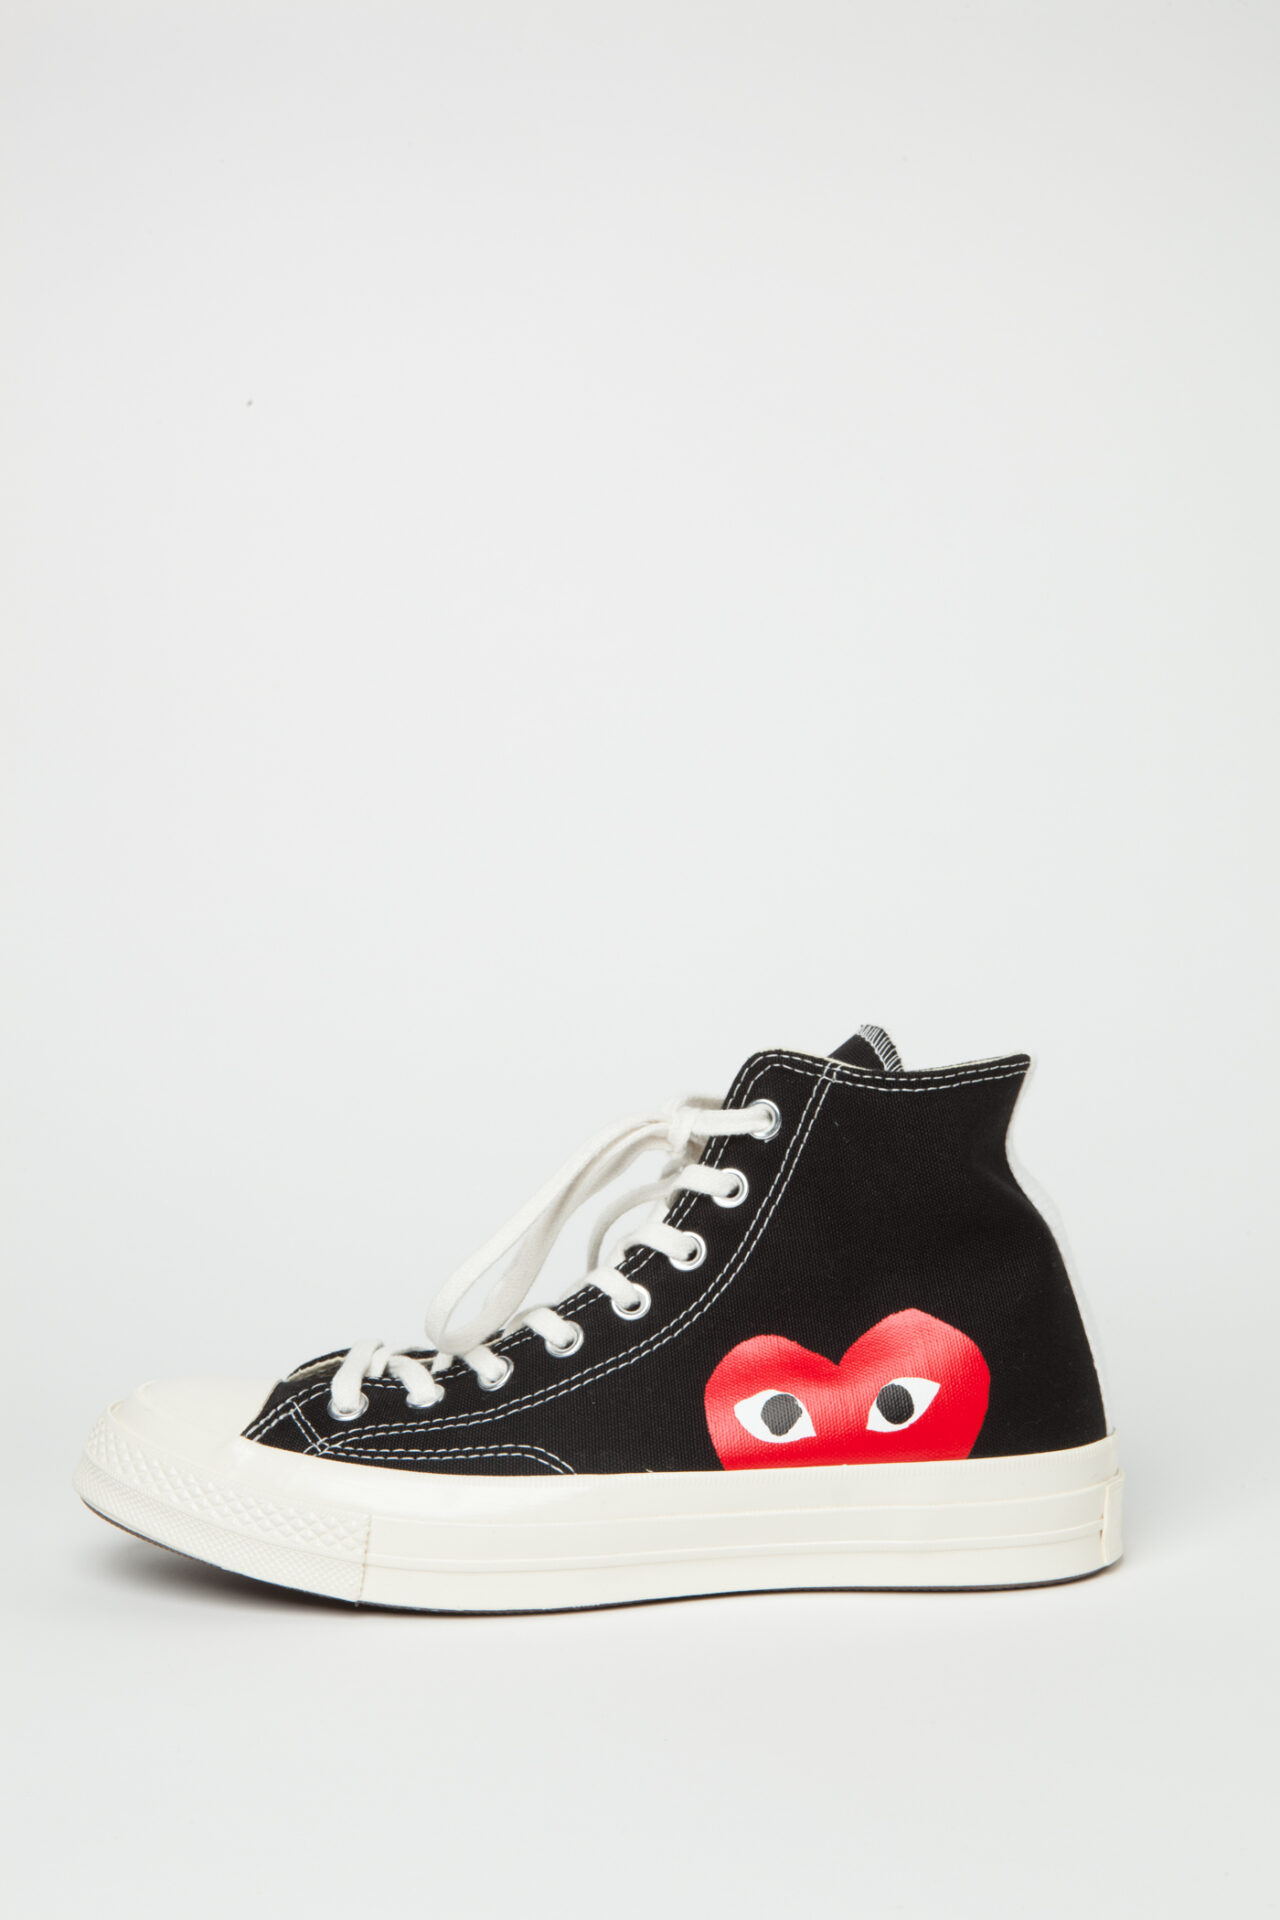 Comme Des Garcons Play - Black Converse Chuck Taylor High Top -  Schwittenberg